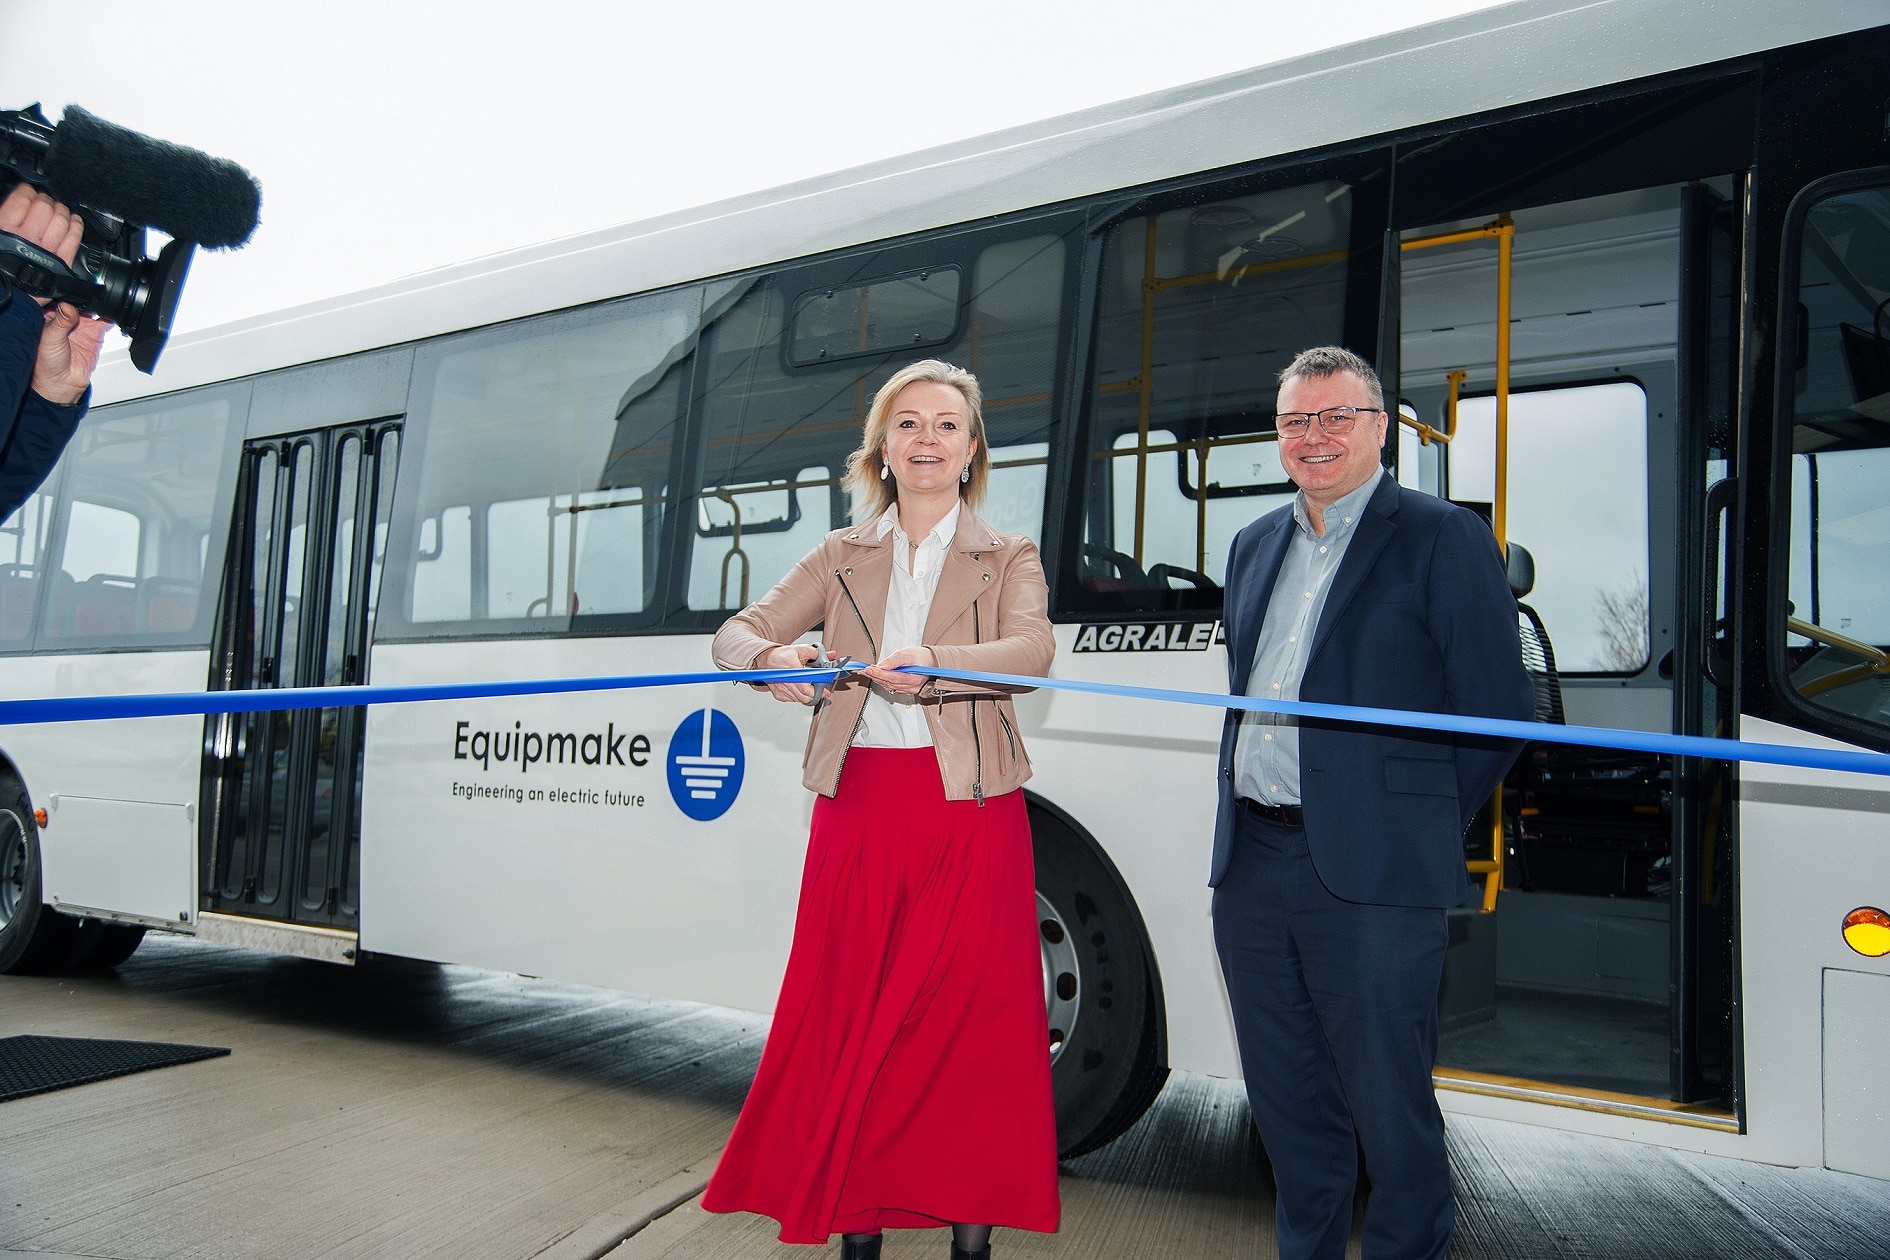 Equipmake electric bus launch with Liz Truss